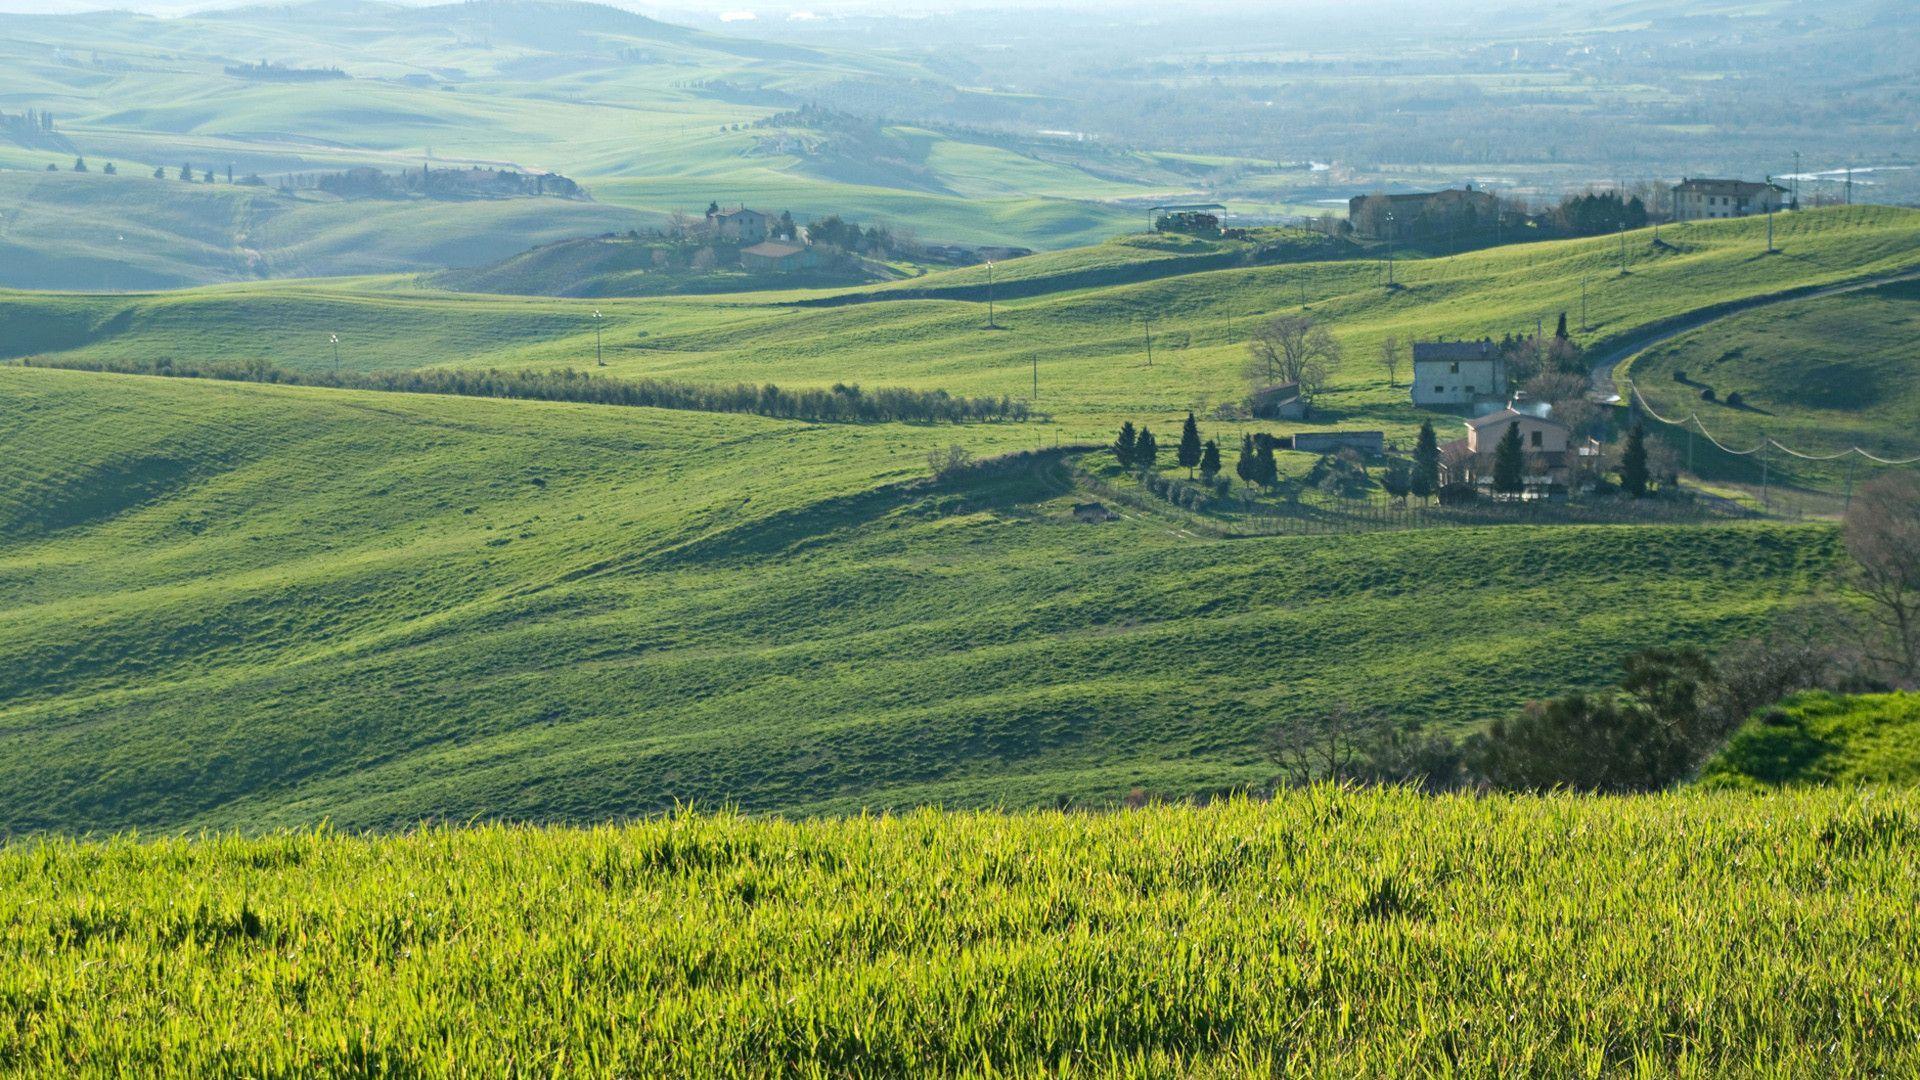 Tuscany Italy widescreen wallpaper. Wide